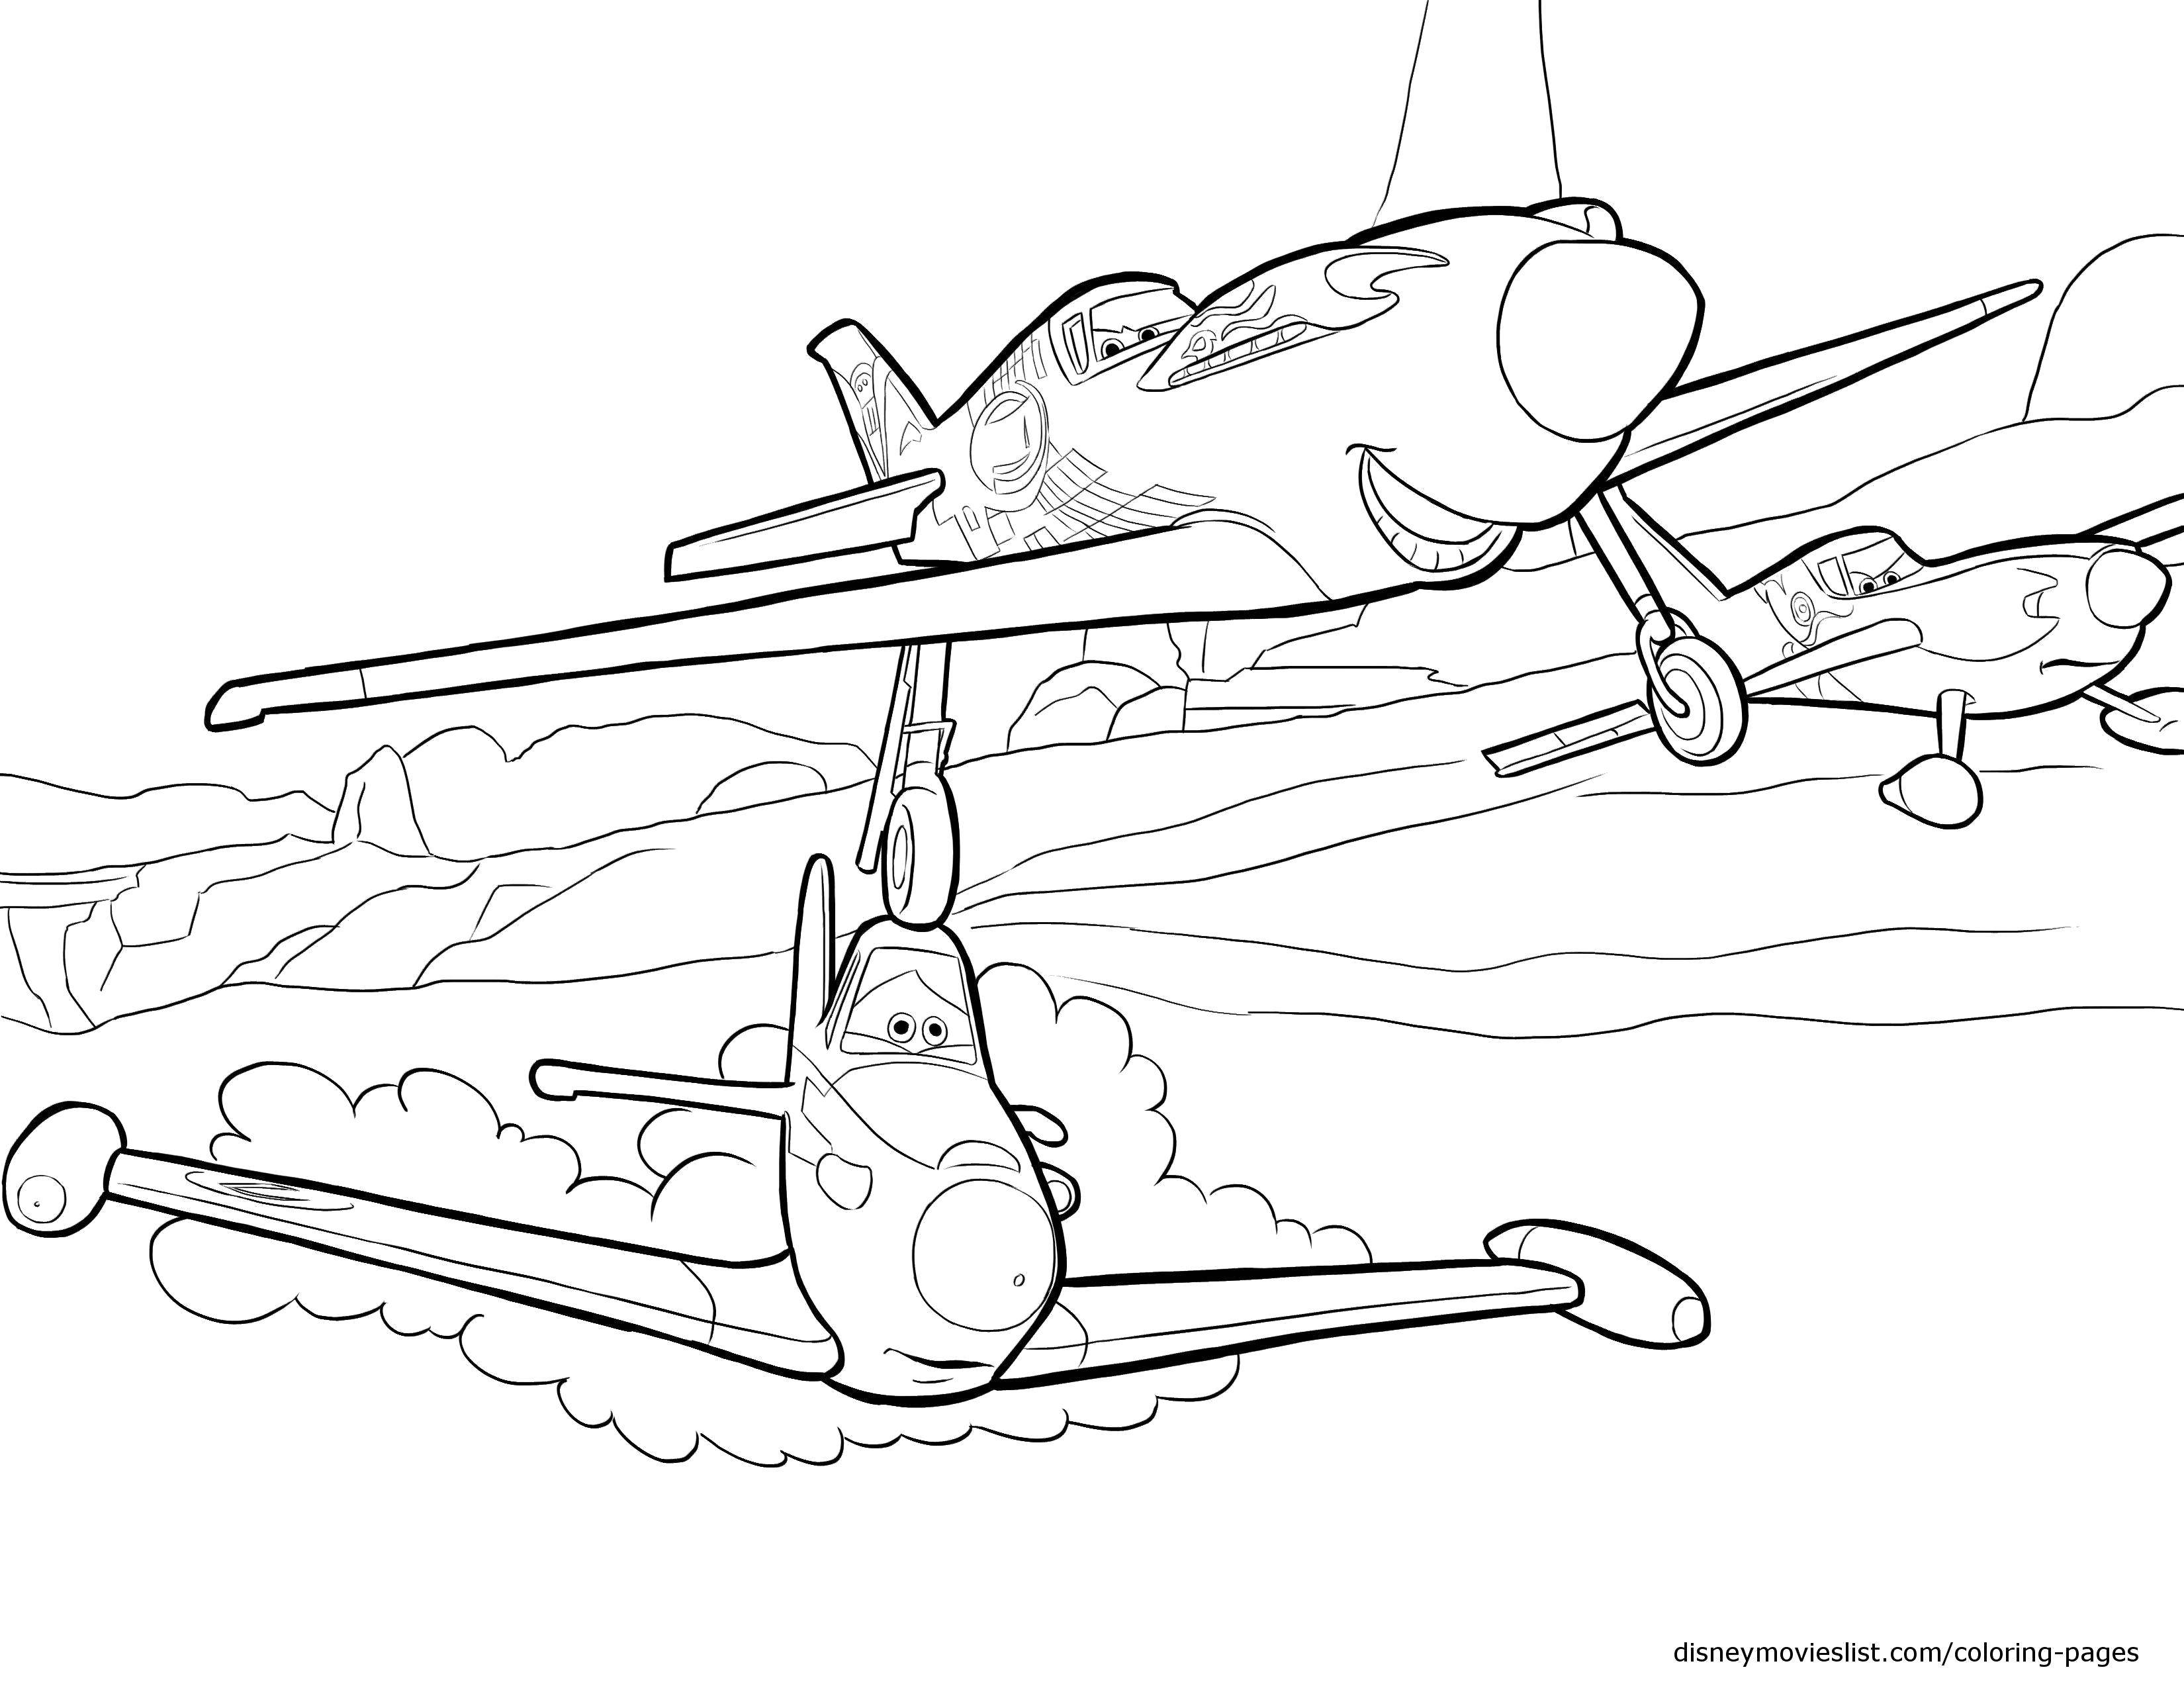 Coloring Cartoon. Category The planes. Tags:  Cartoon character.